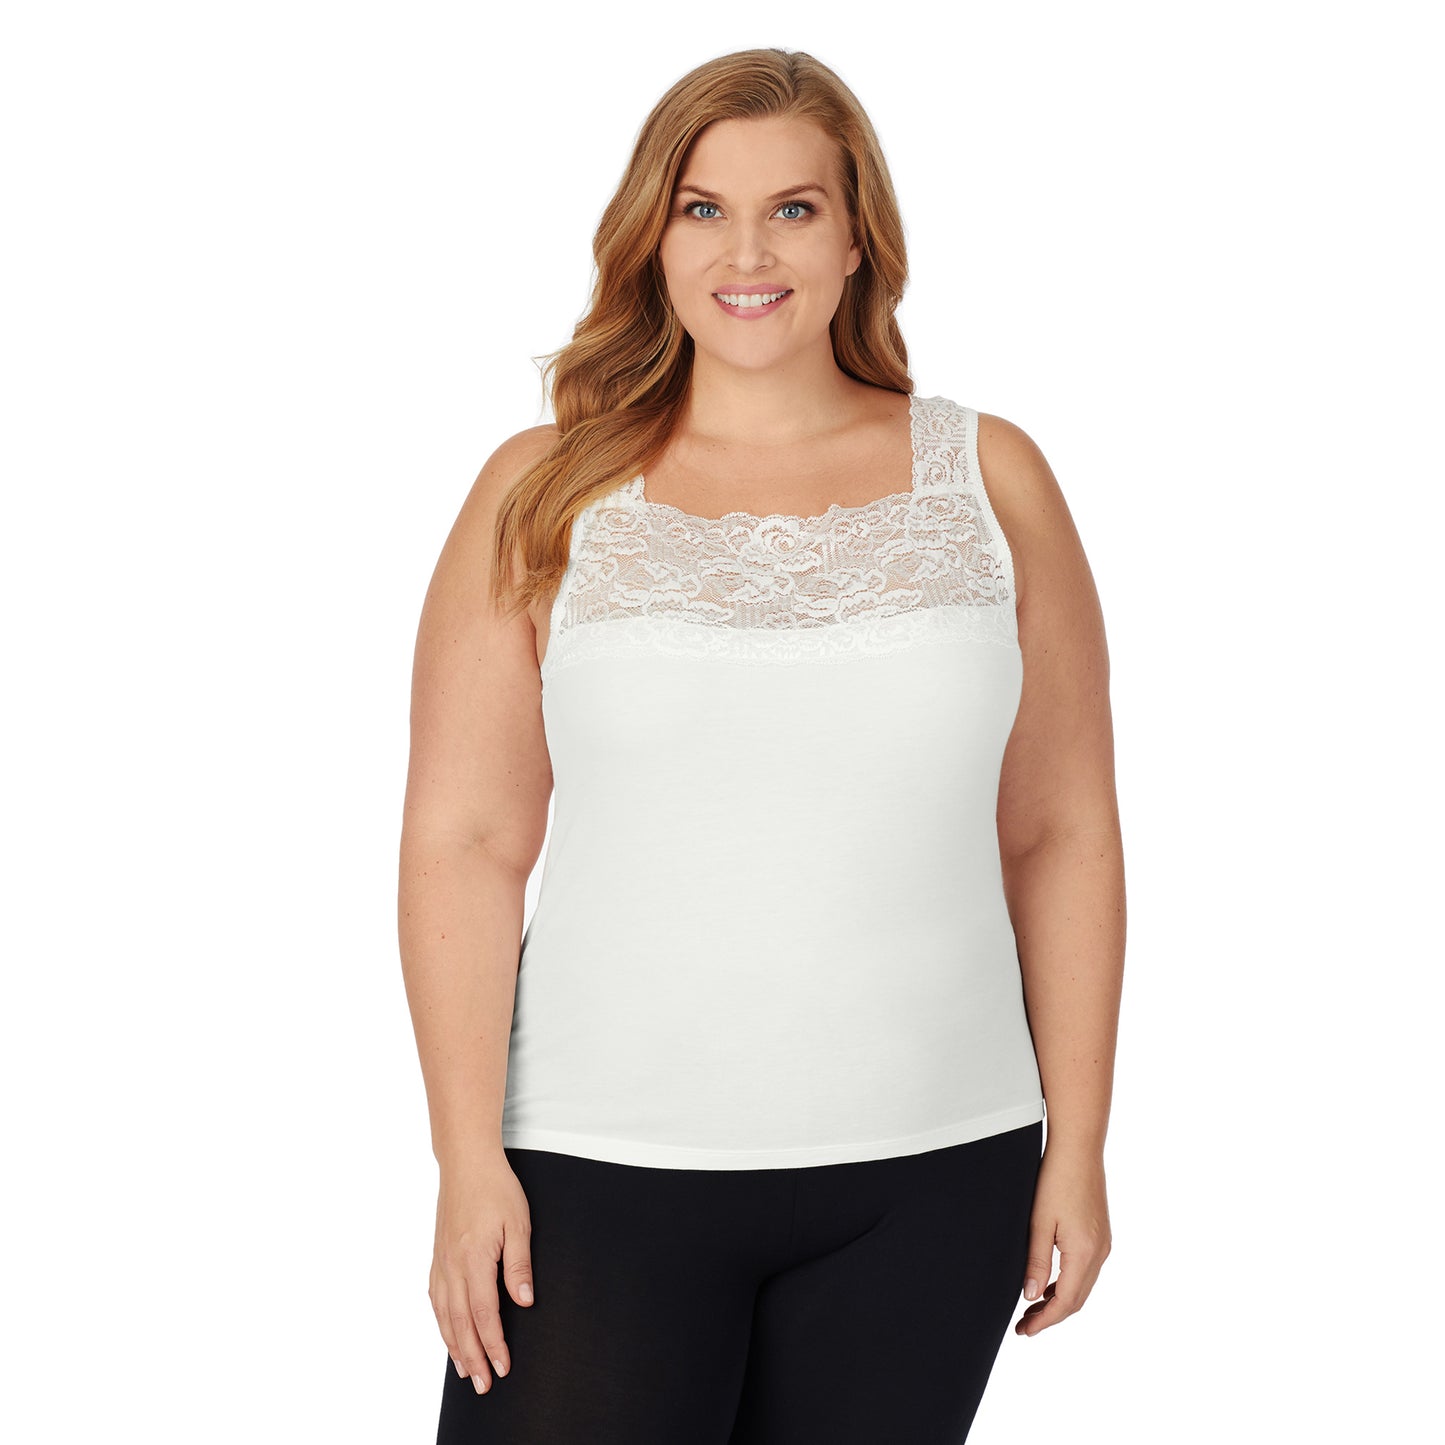 Ivory; Model is wearing size 1x. She is 5'9", Bust 38", Waist 36", Hips 48.5". @A lady wearing ivory lace cami